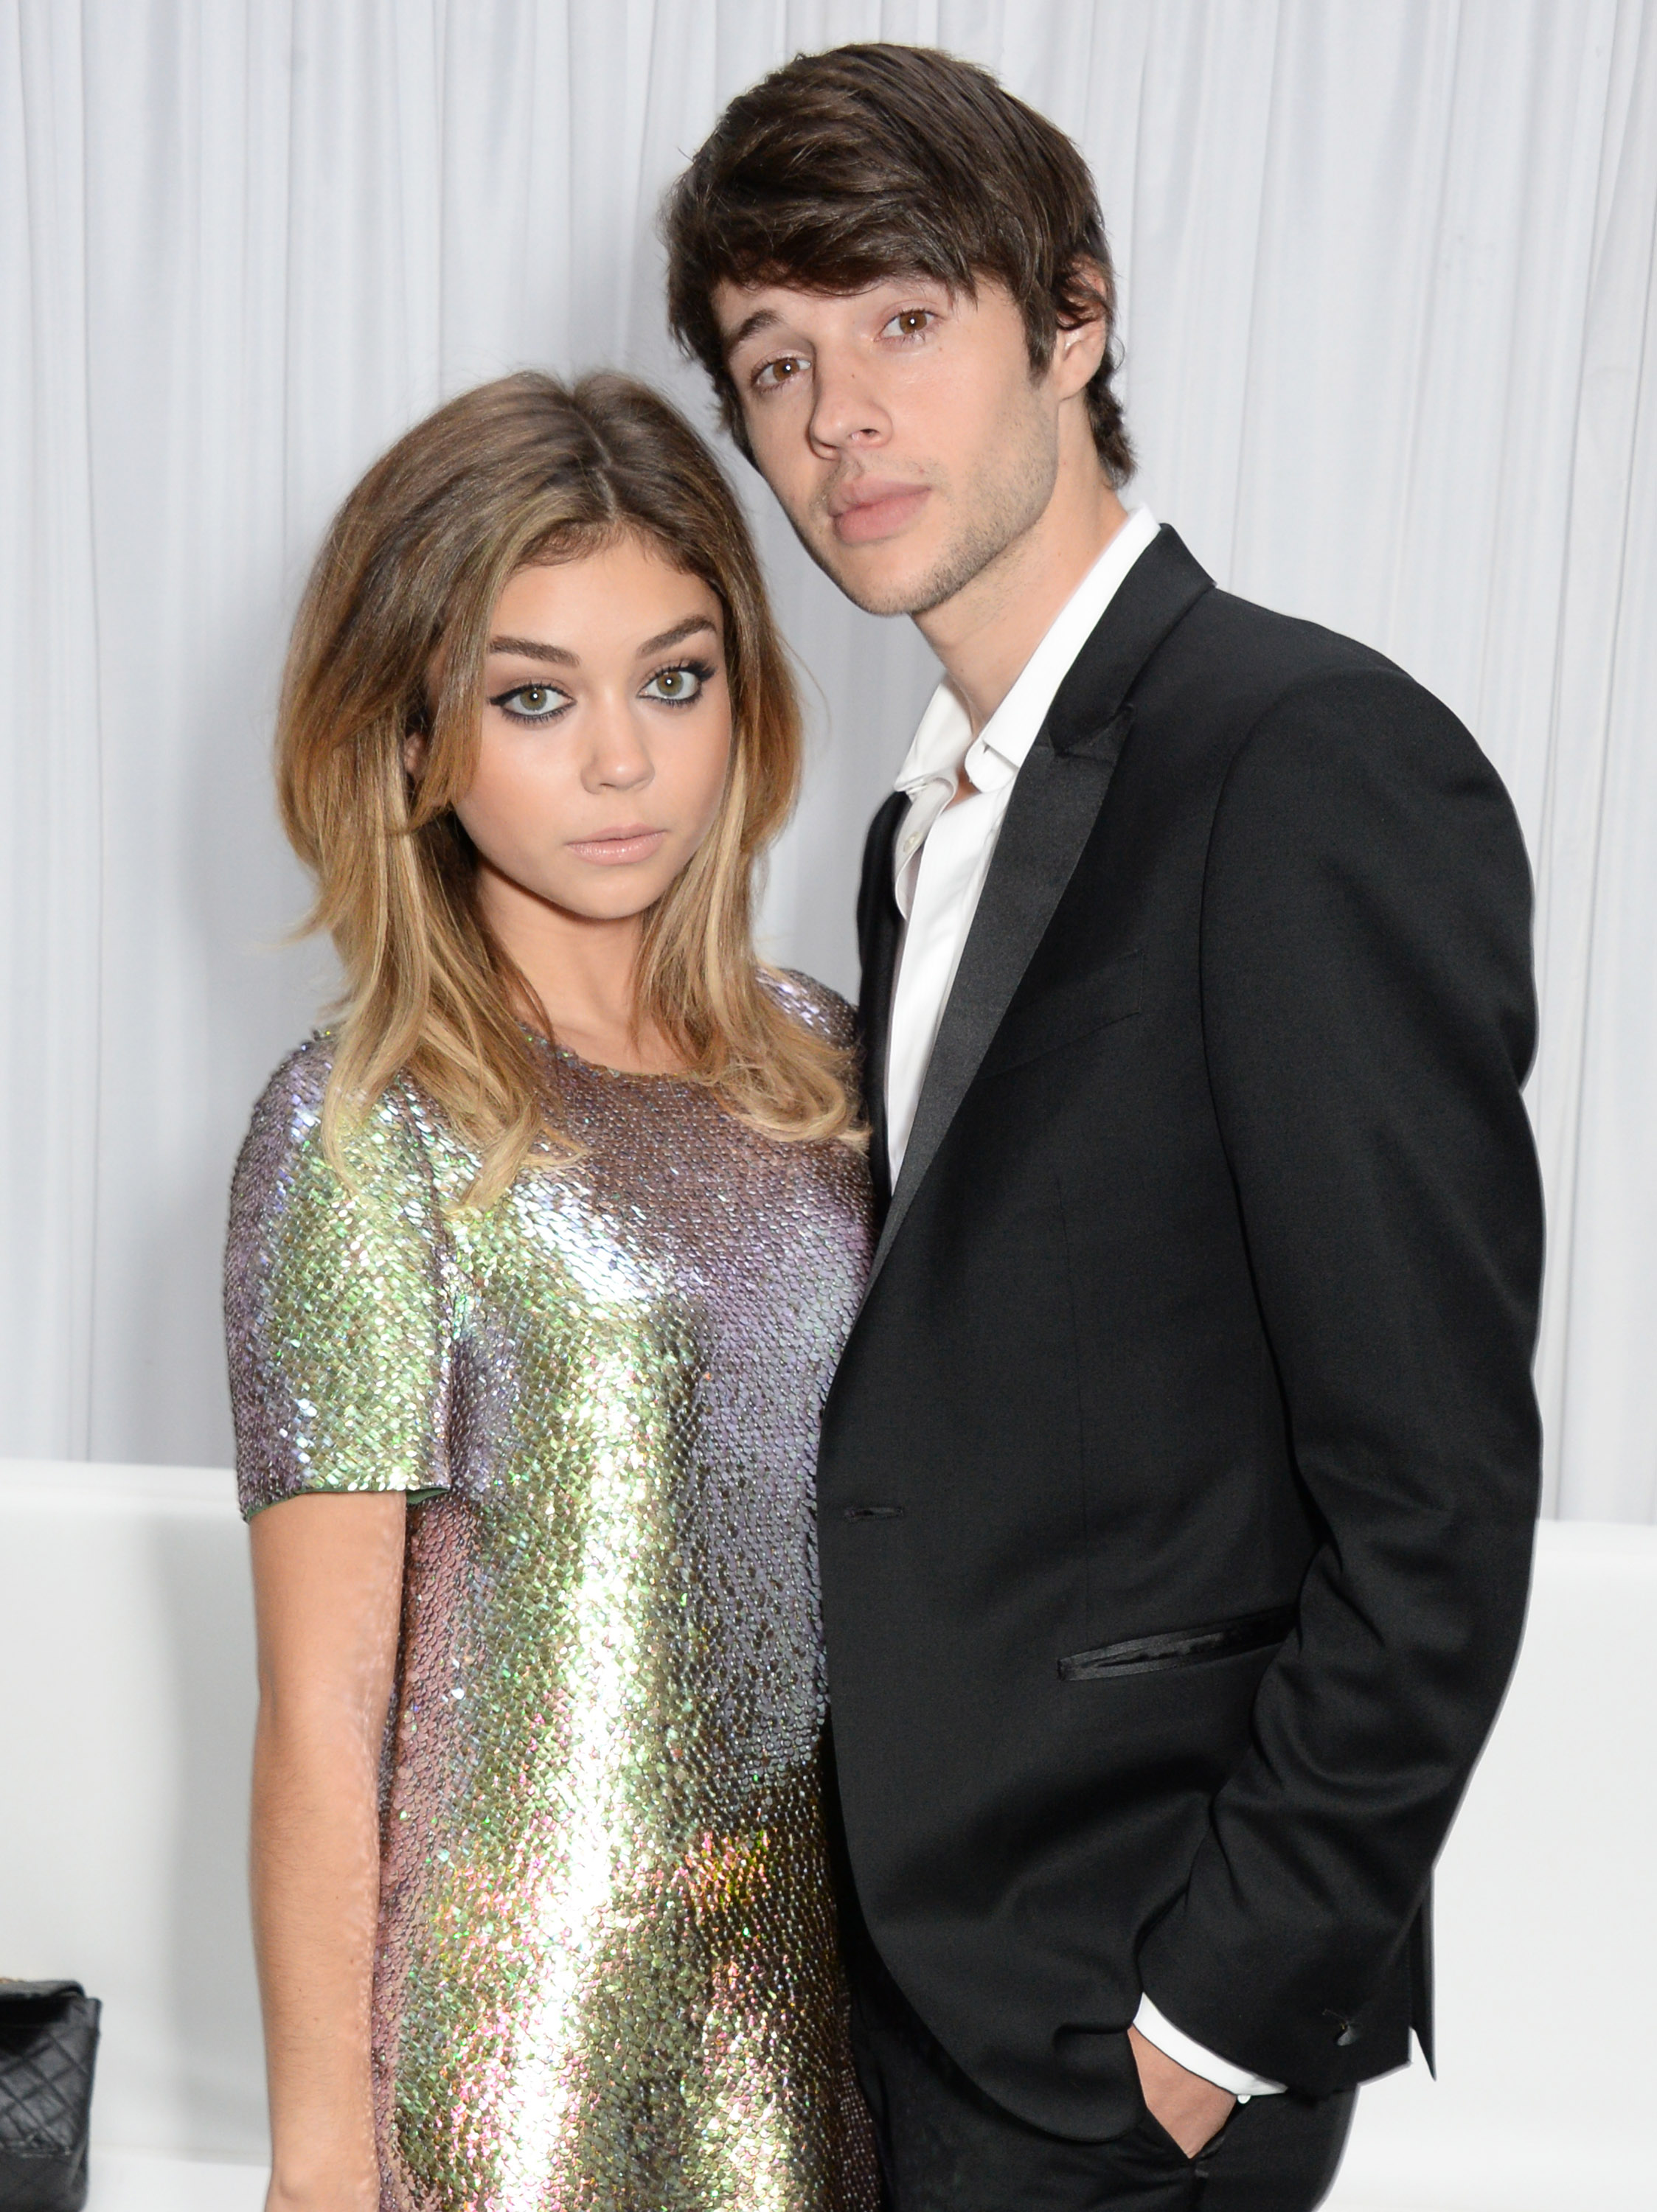 Sarah Hyland (L) and Matt Prokop attend the Glamour Women of the Year Awards in Berkeley Square Gardens on June 3, 2014 in London, England. (David M. Benett&amp;mdash;Getty Images)